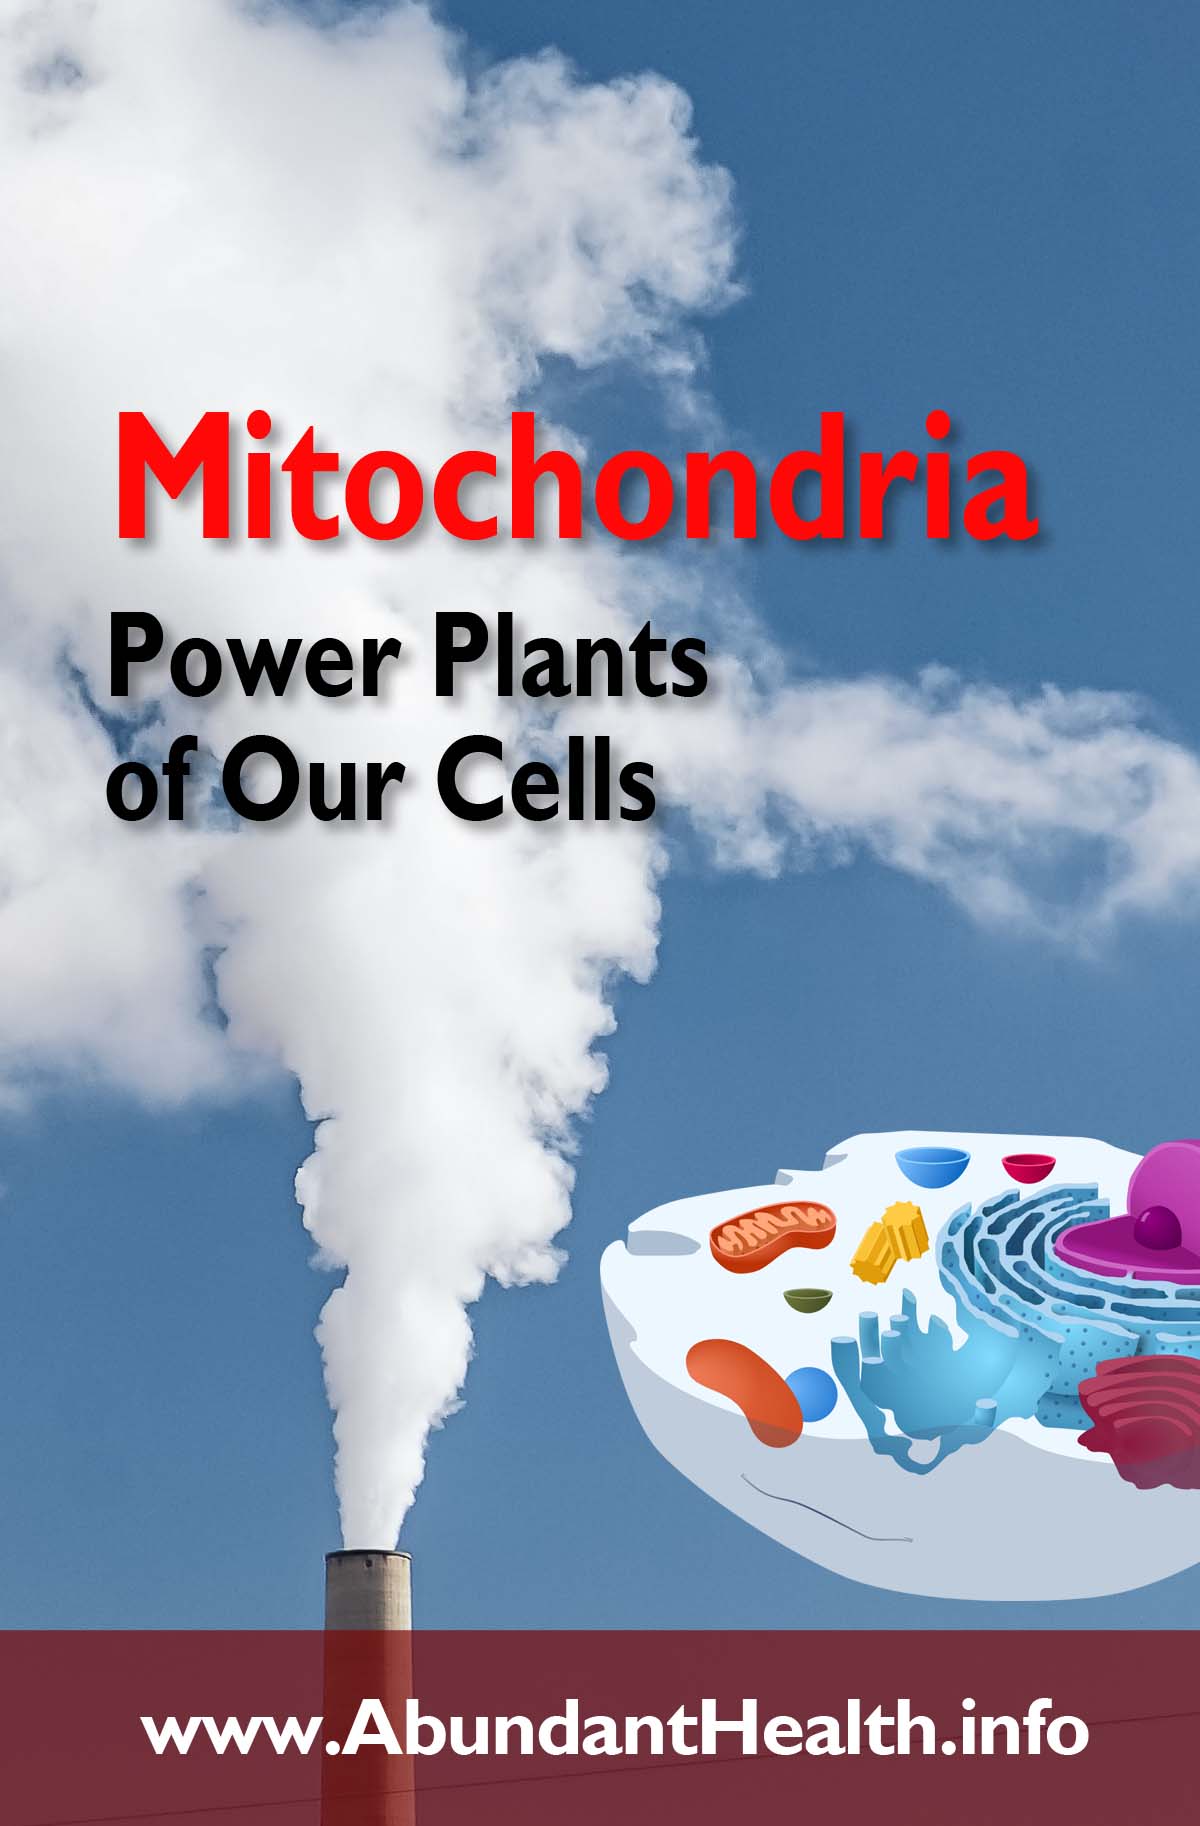 Mitochondria - Power Plants of Our Cells